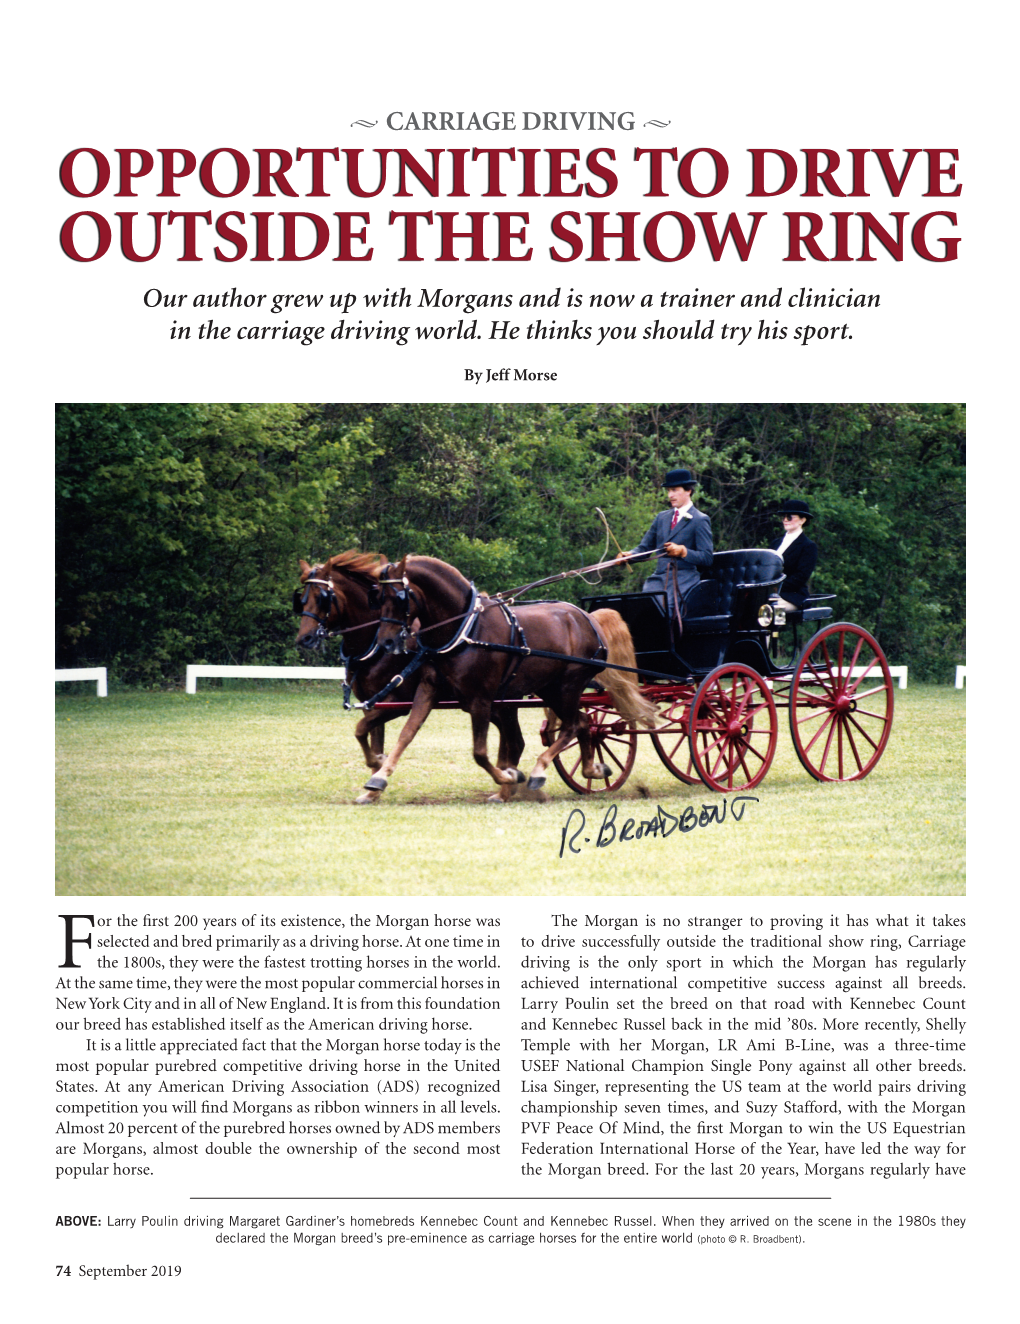 OUTSIDE the SHOW RING Our Author Grew up with Morgans and Is Now a Trainer and Clinician in the Carriage Driving World